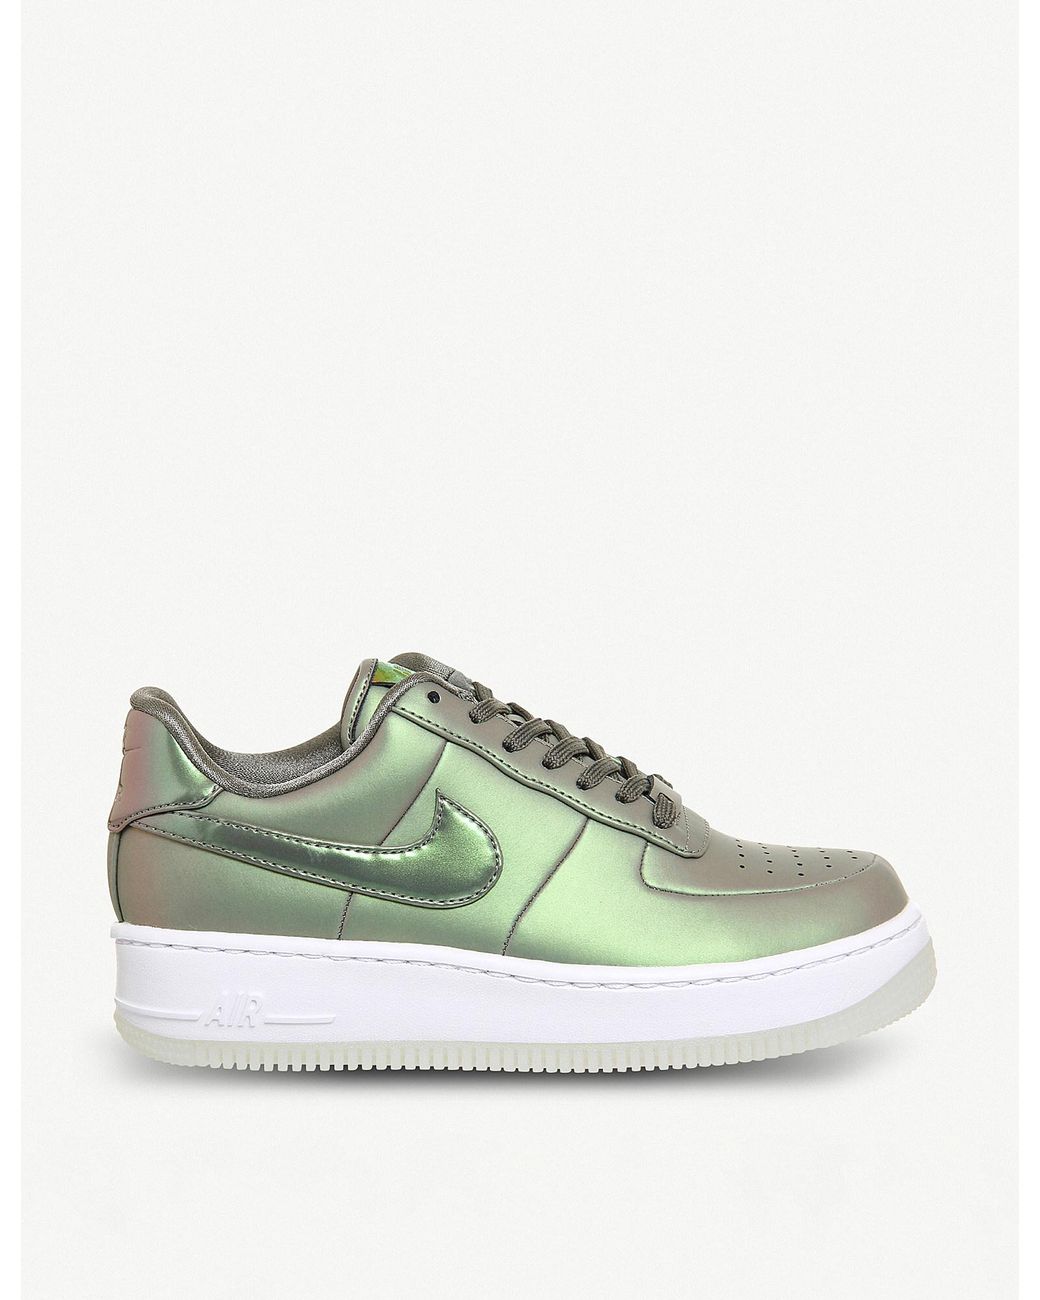 sesión Sustancial Puno Nike Air Force 1 Upstep Iridescent Metallic Leather Trainers in Green | Lyst